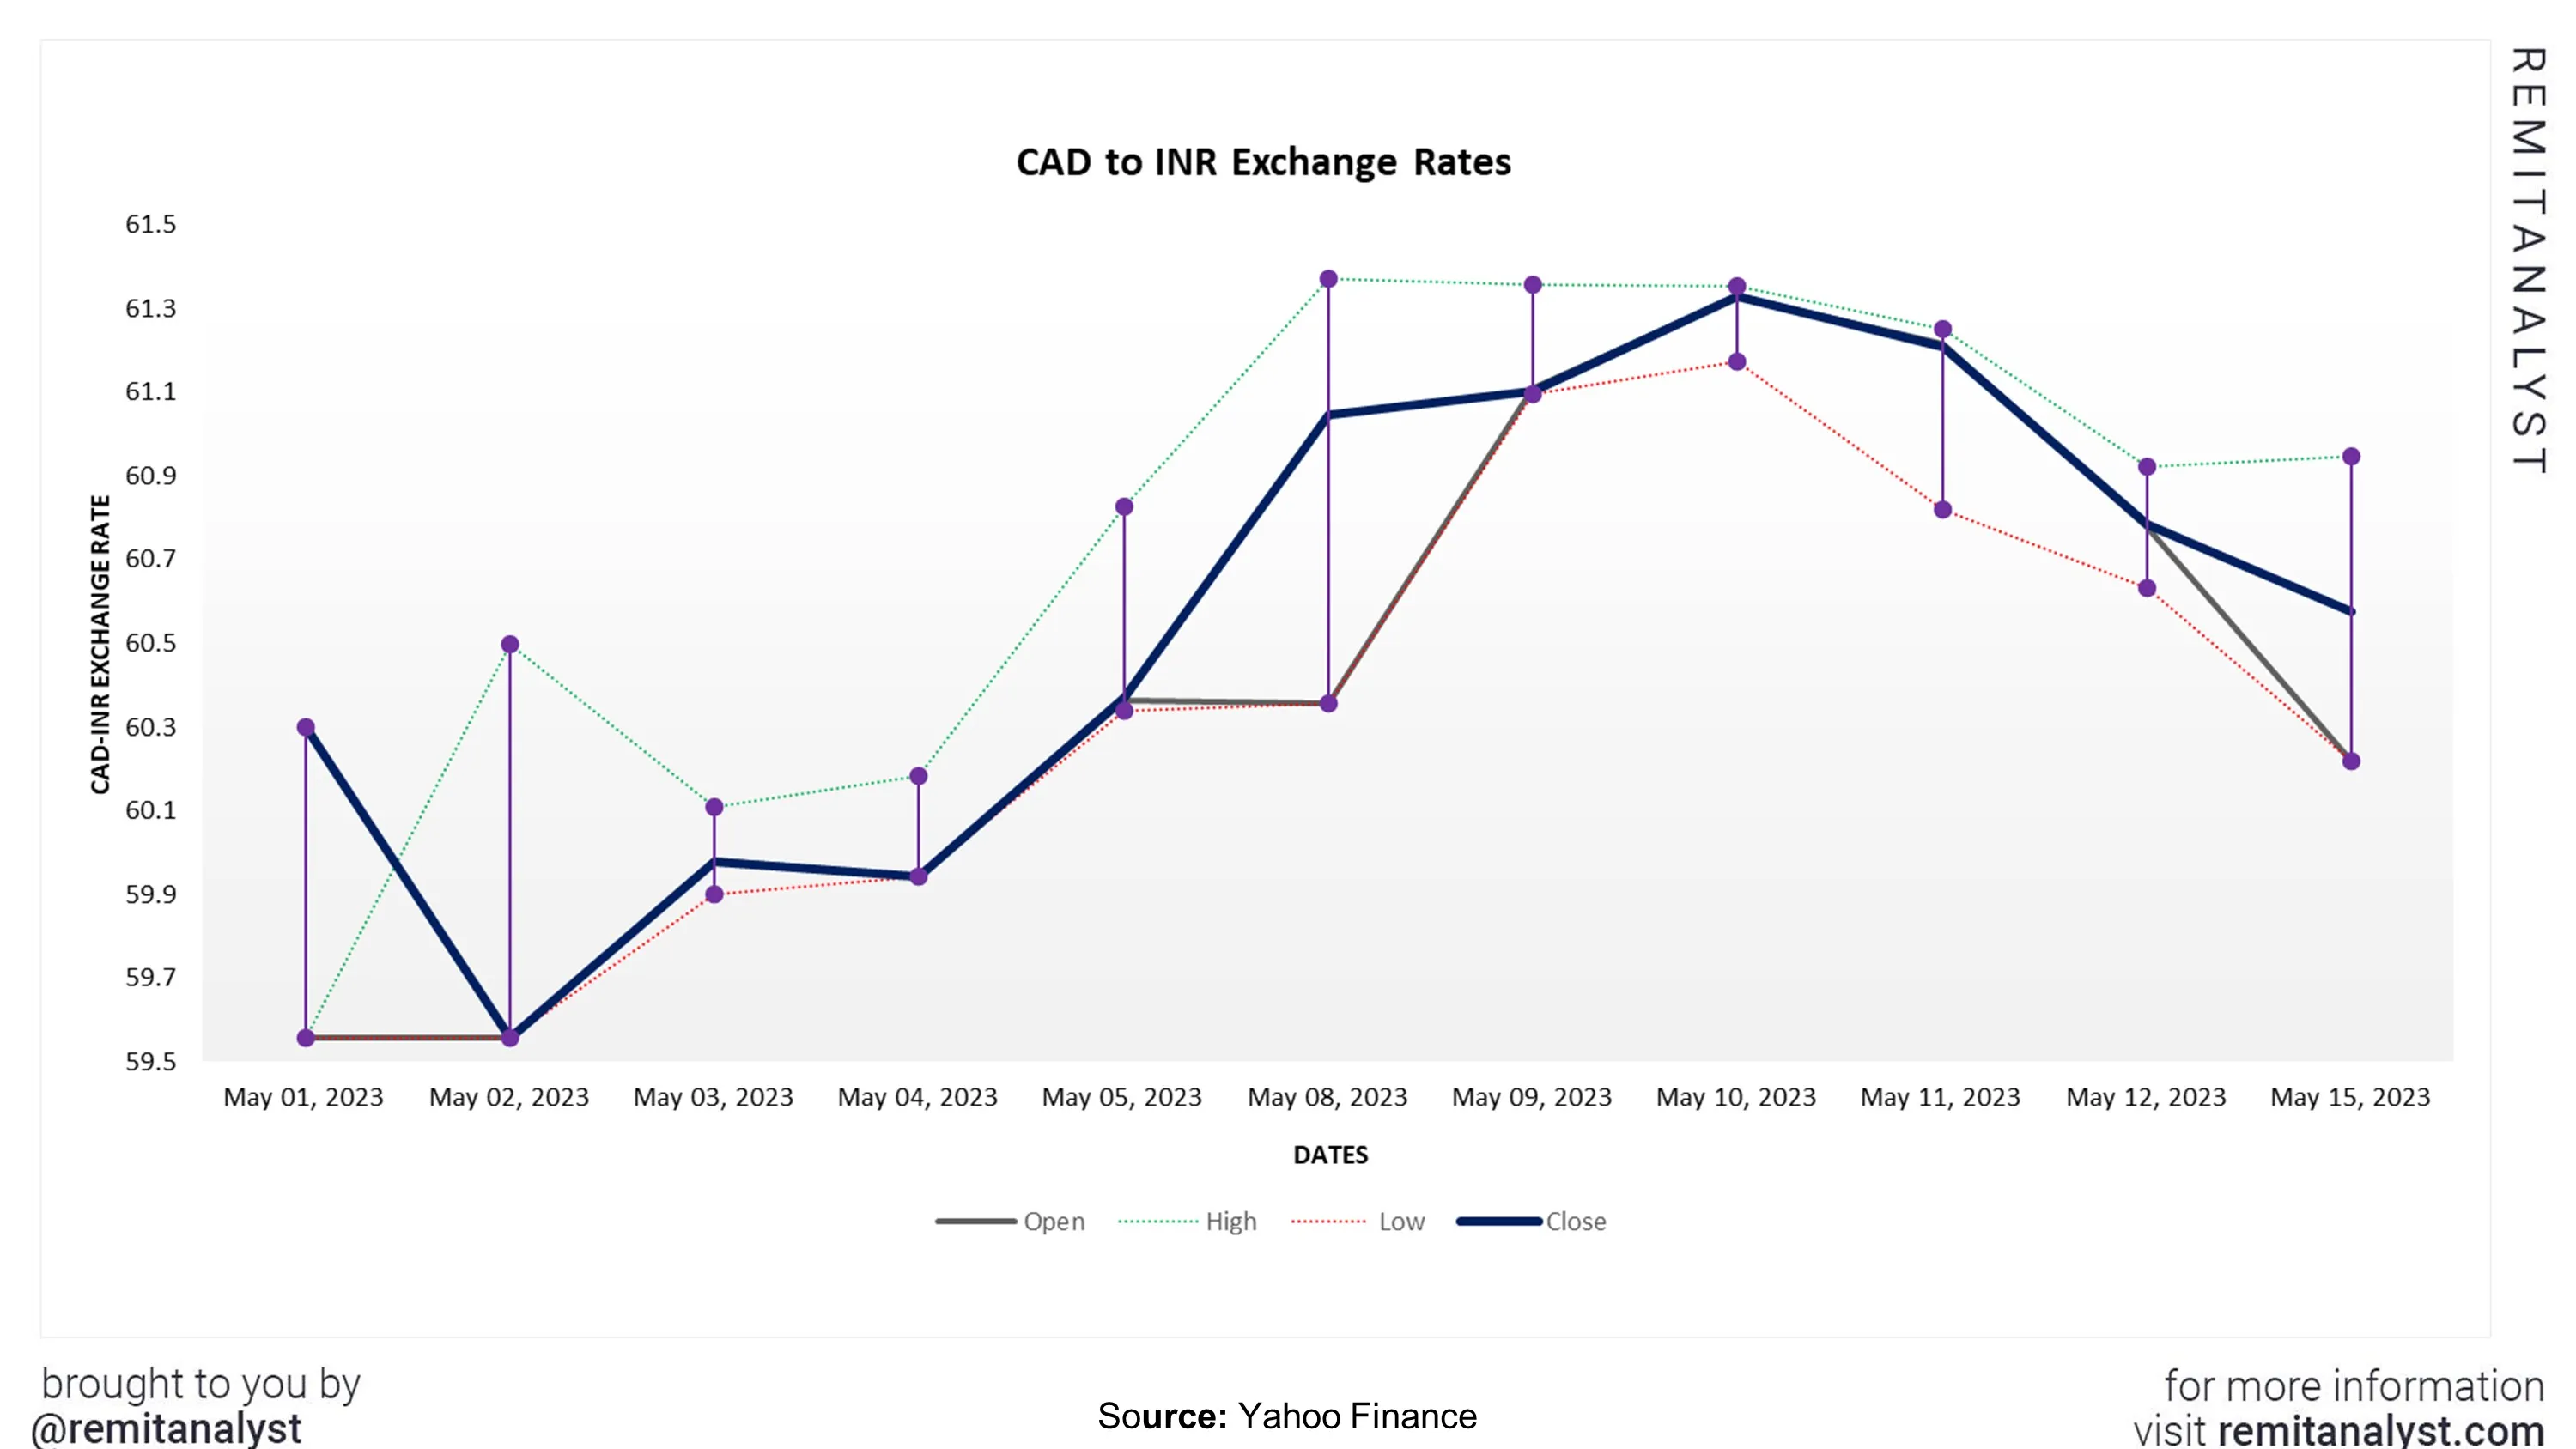 cad-to-inr-exchange-rate-from-1-may-2023-to-15-may-2023